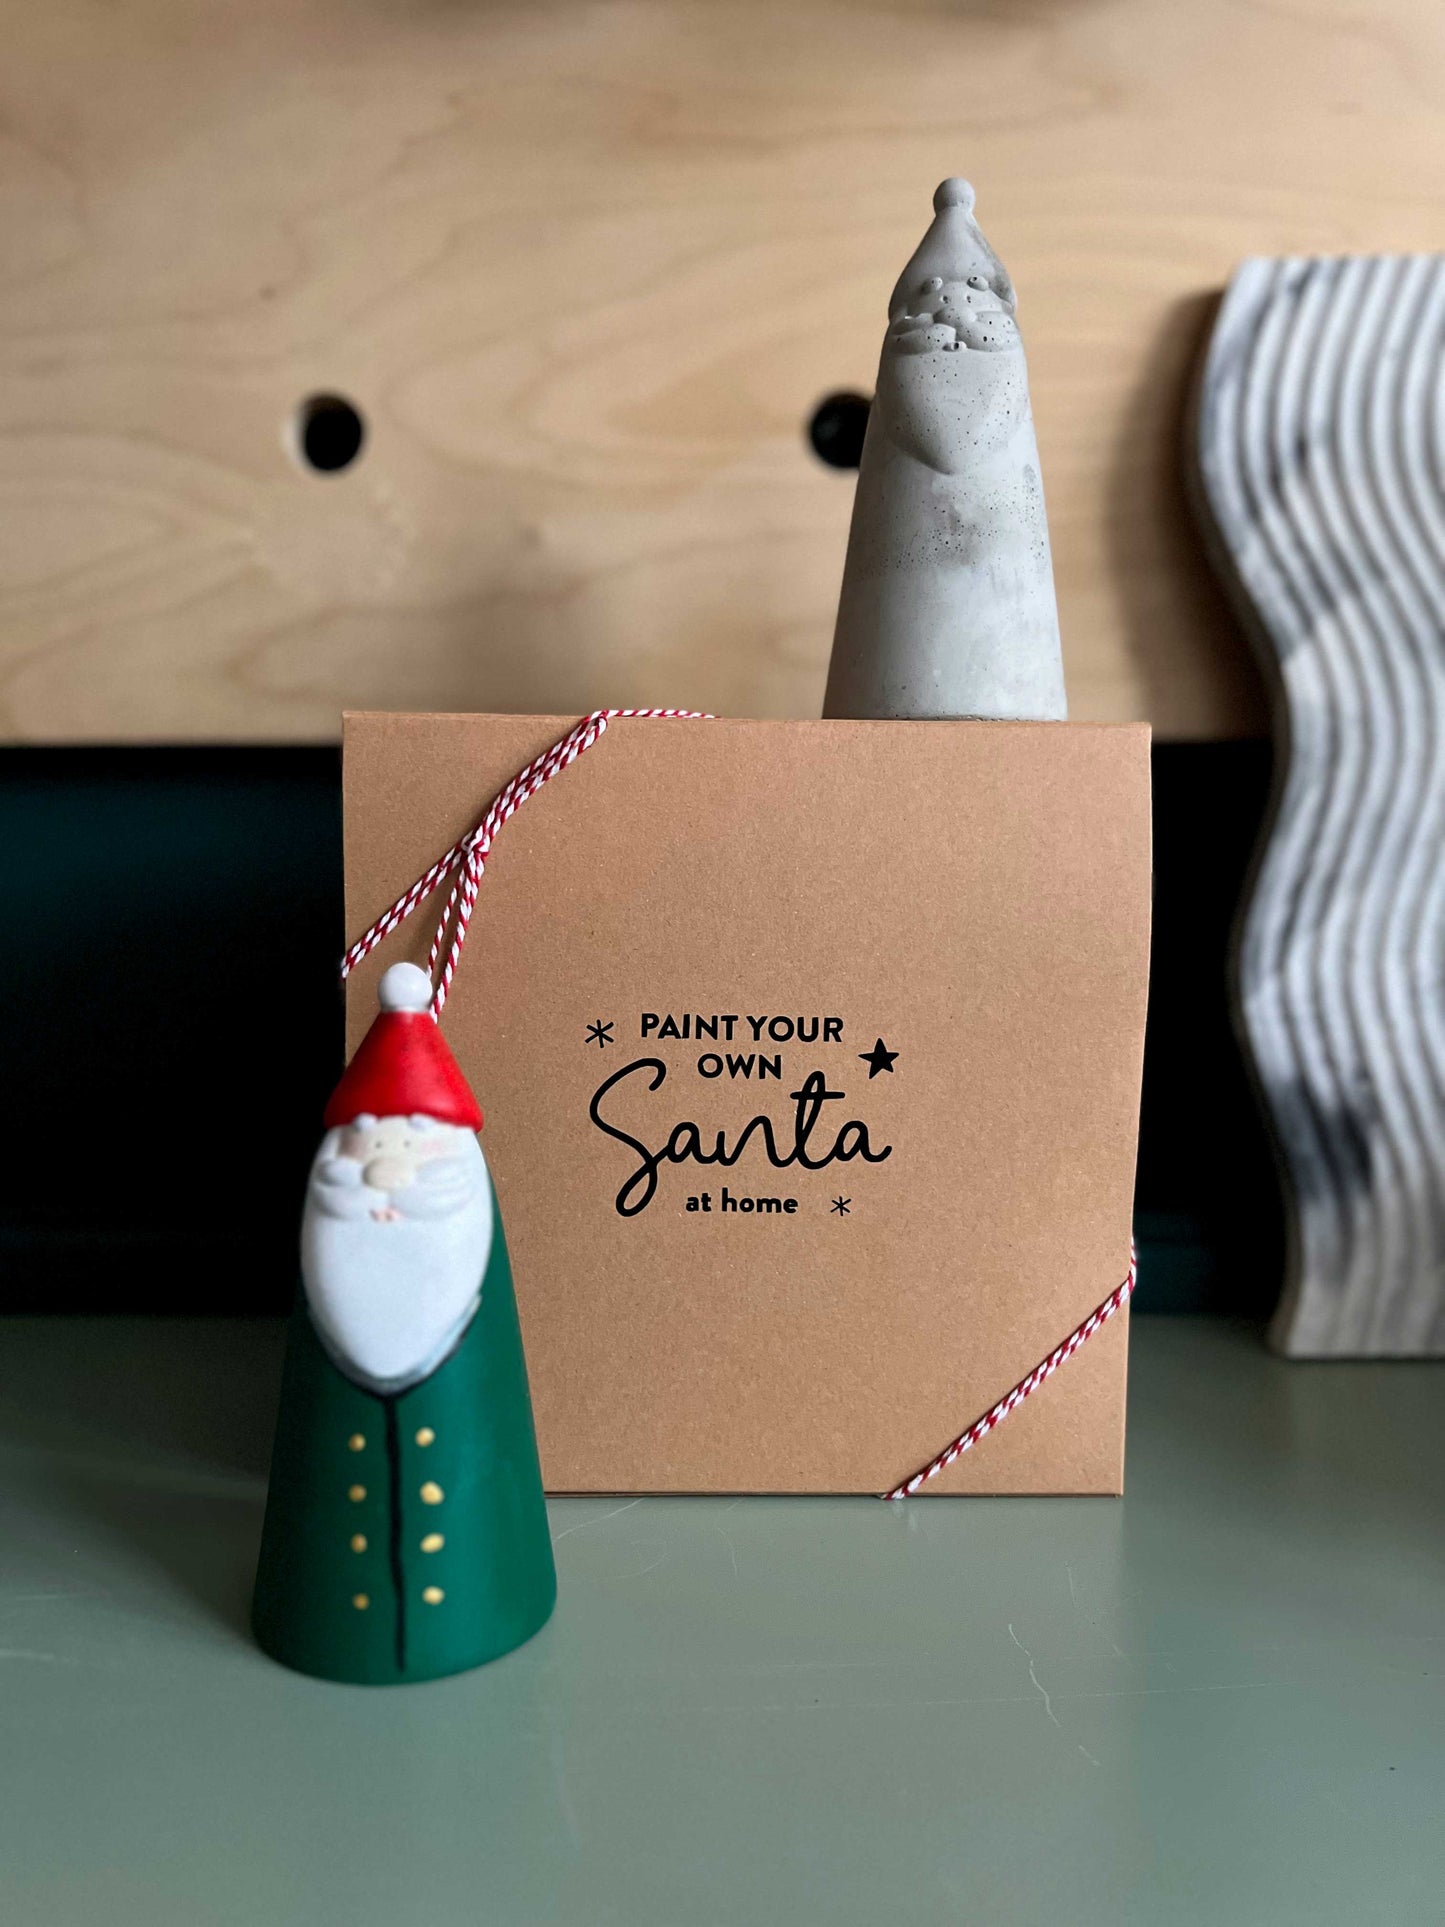 'Paint your own Santa' Gift Box